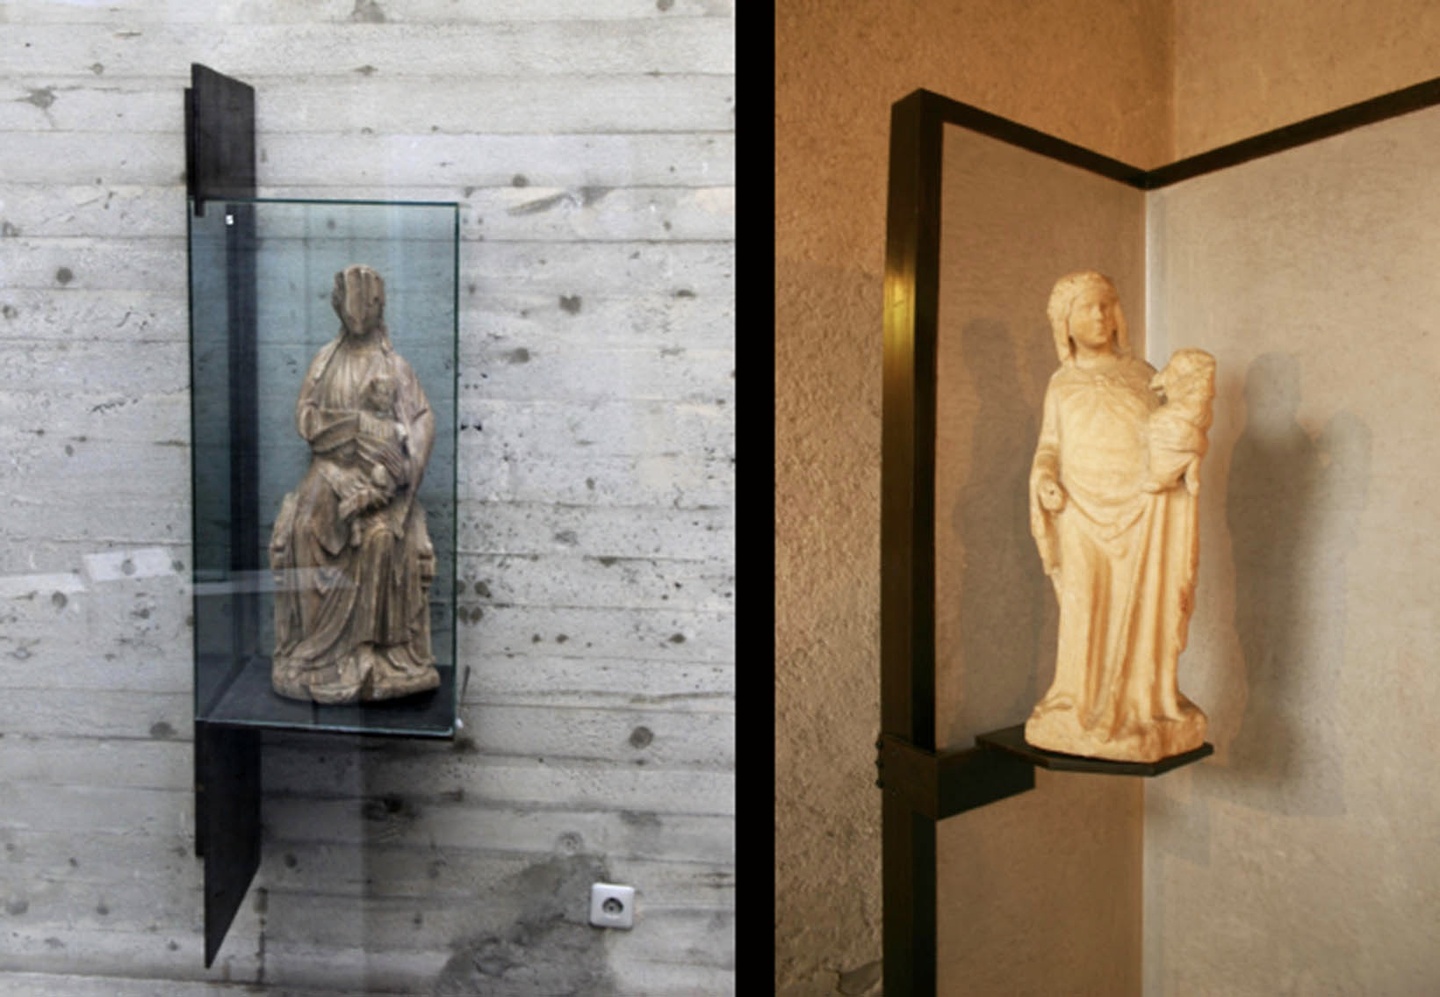 Dual-panel photo of two sculptures, each depicting a figure holding a child. The left one is gray in color, and the right one is a yellowish-cream color.